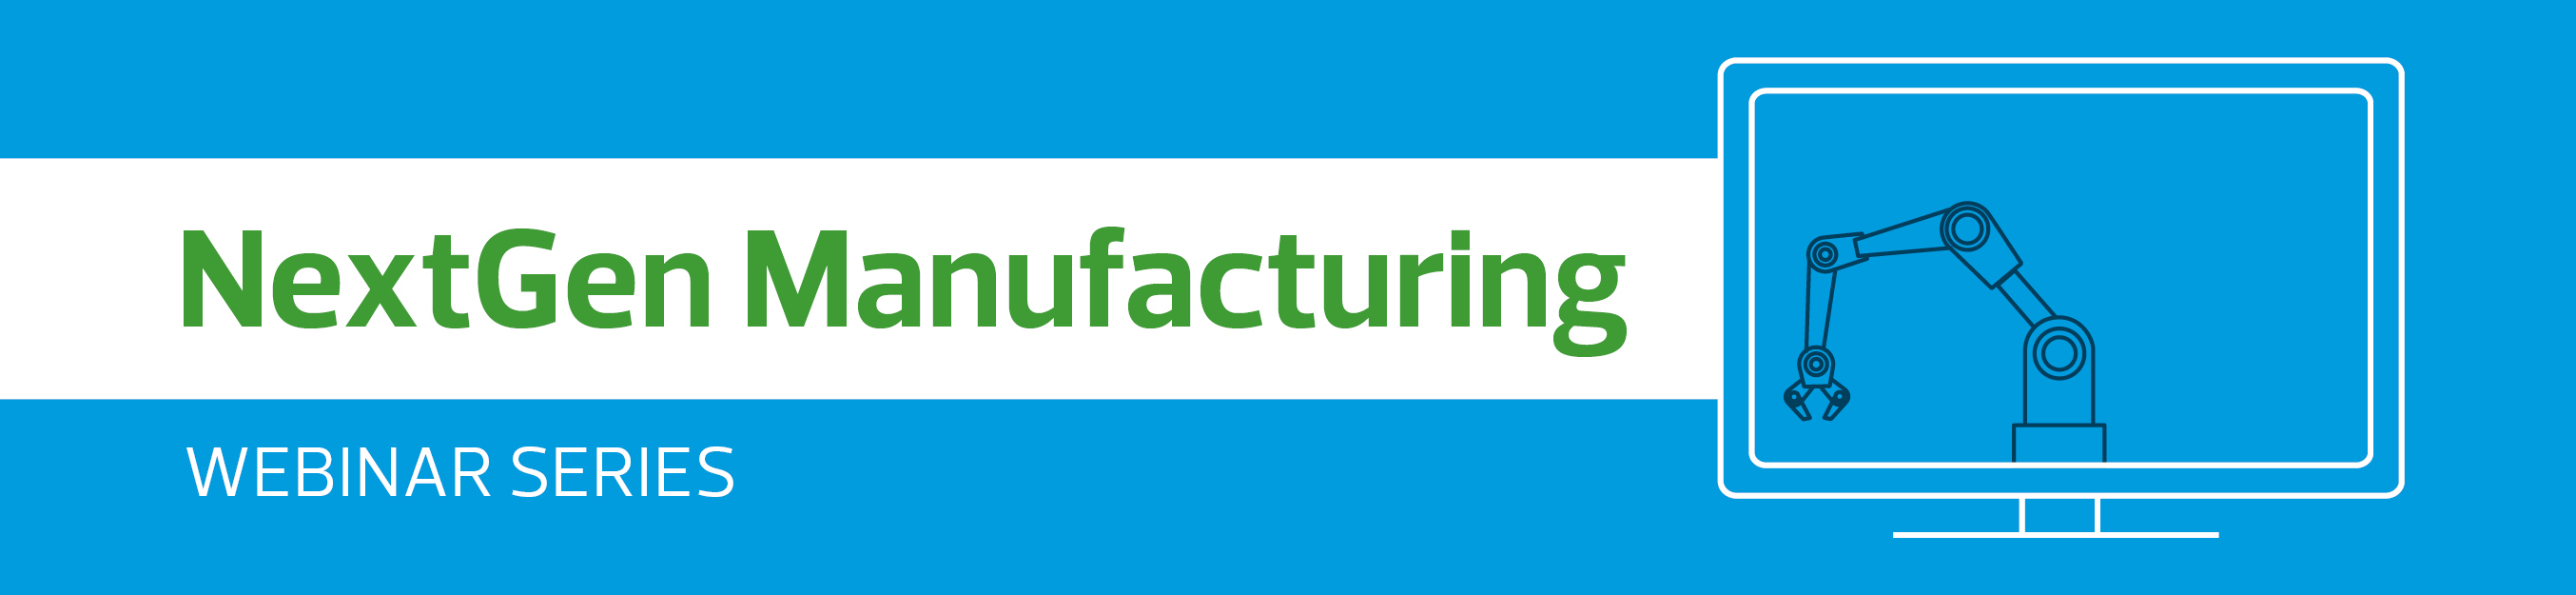 In partnership with IMCRC, Facility of Intelligent Fabrication and Queensland AI Hub, RSM Australia is proud to present our next webinar focussed on helping manufacturing businesses adapt, thrive and grow in these challenging times.